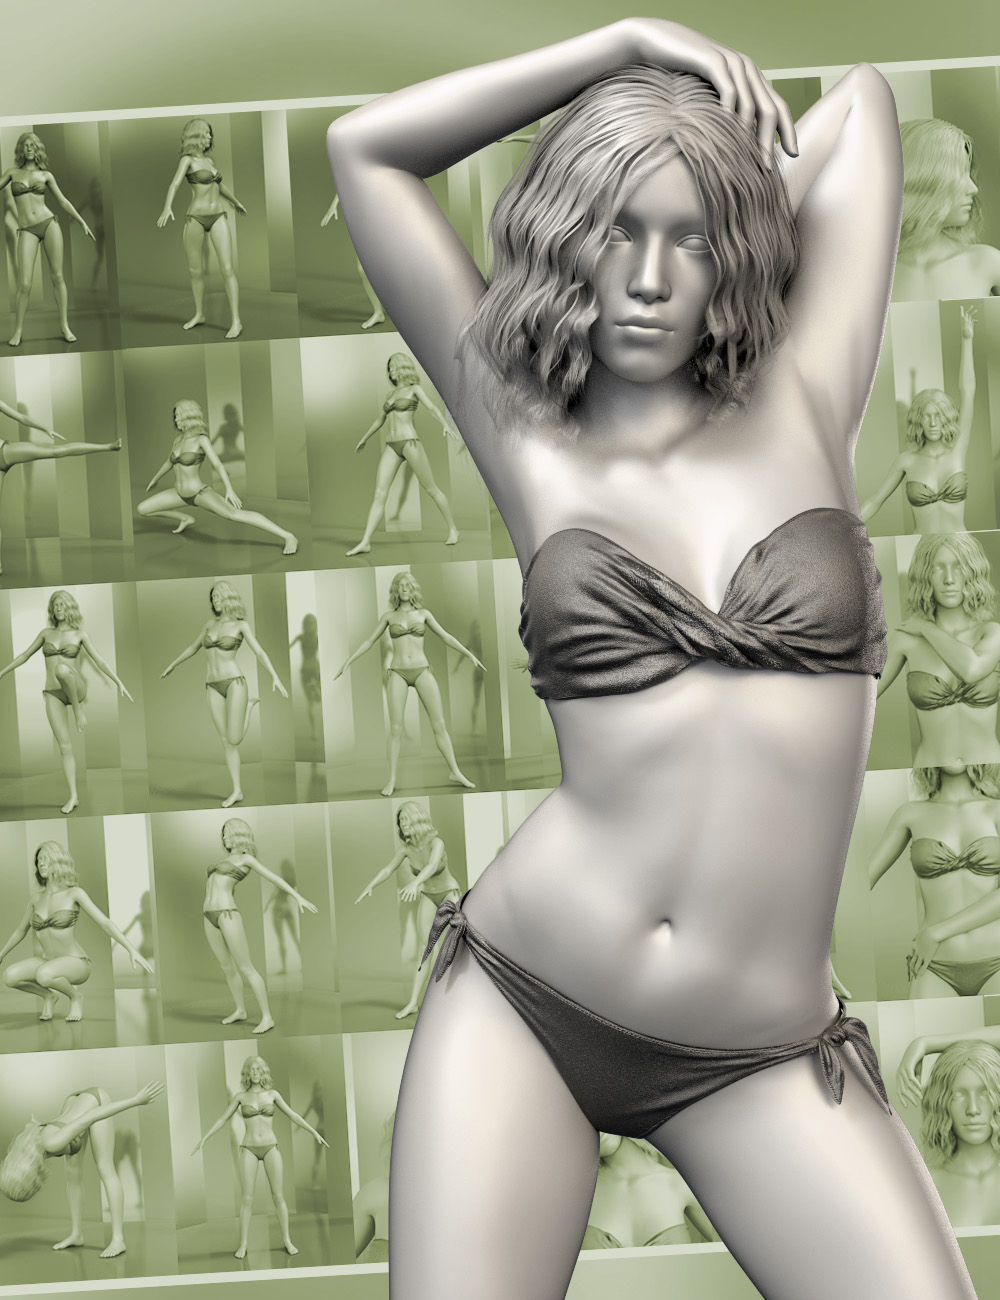 Pose Architect for Genesis 3 Female(s) by: 3D Universe, 3D Models by Daz 3D